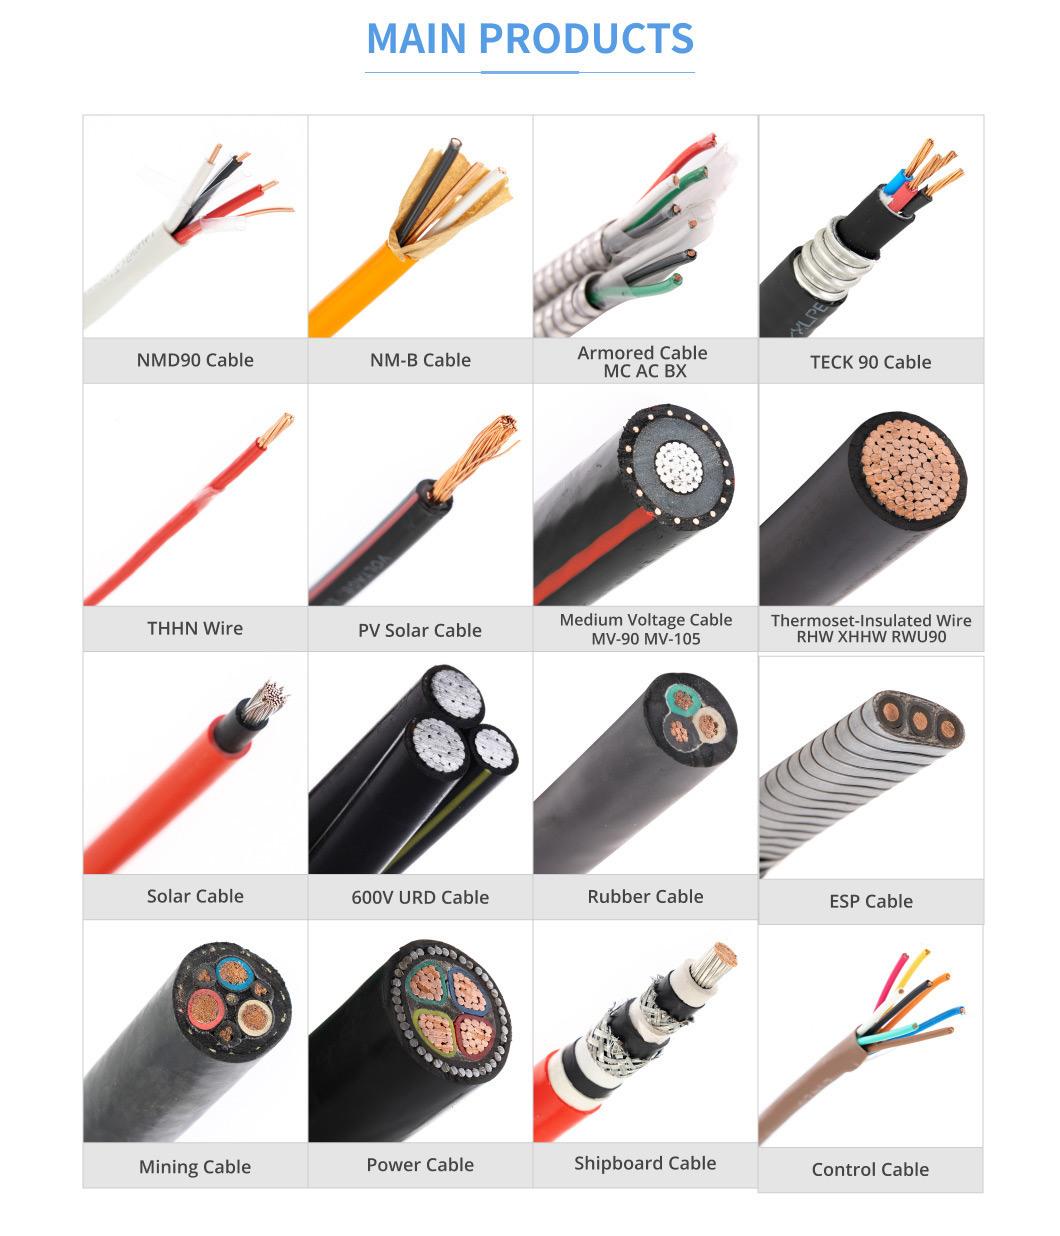 300V PVC Nylon Housing Cable Electrical Wire Nmd90 Cable